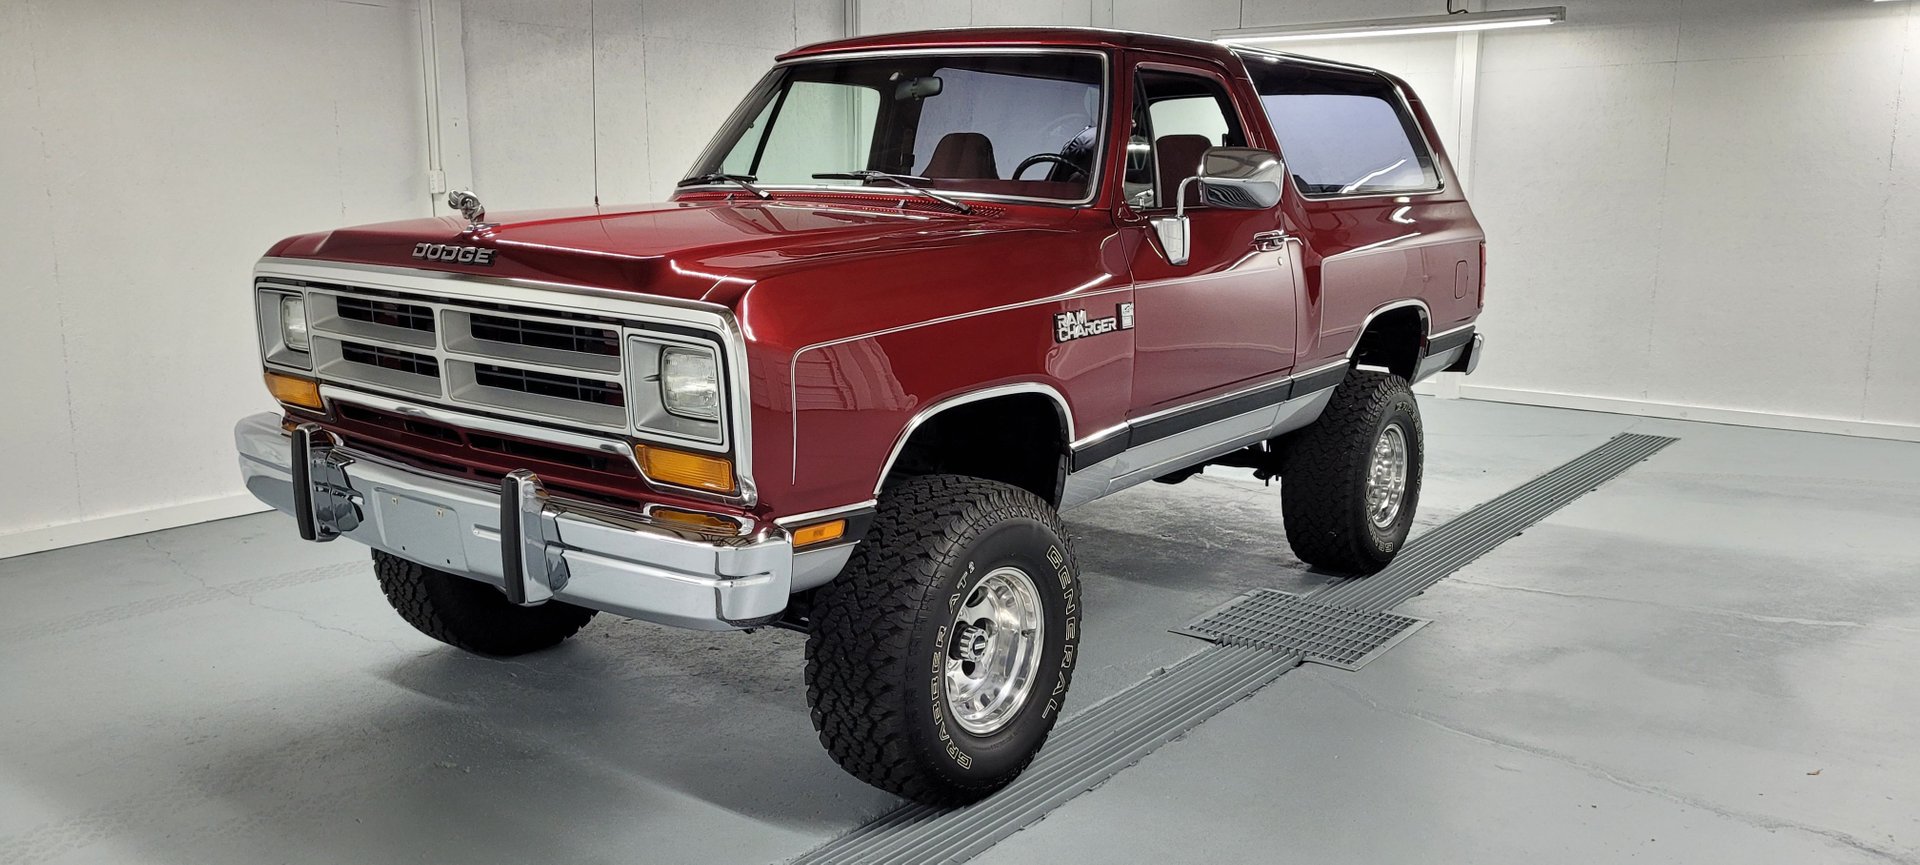 1989 dodge ram charger